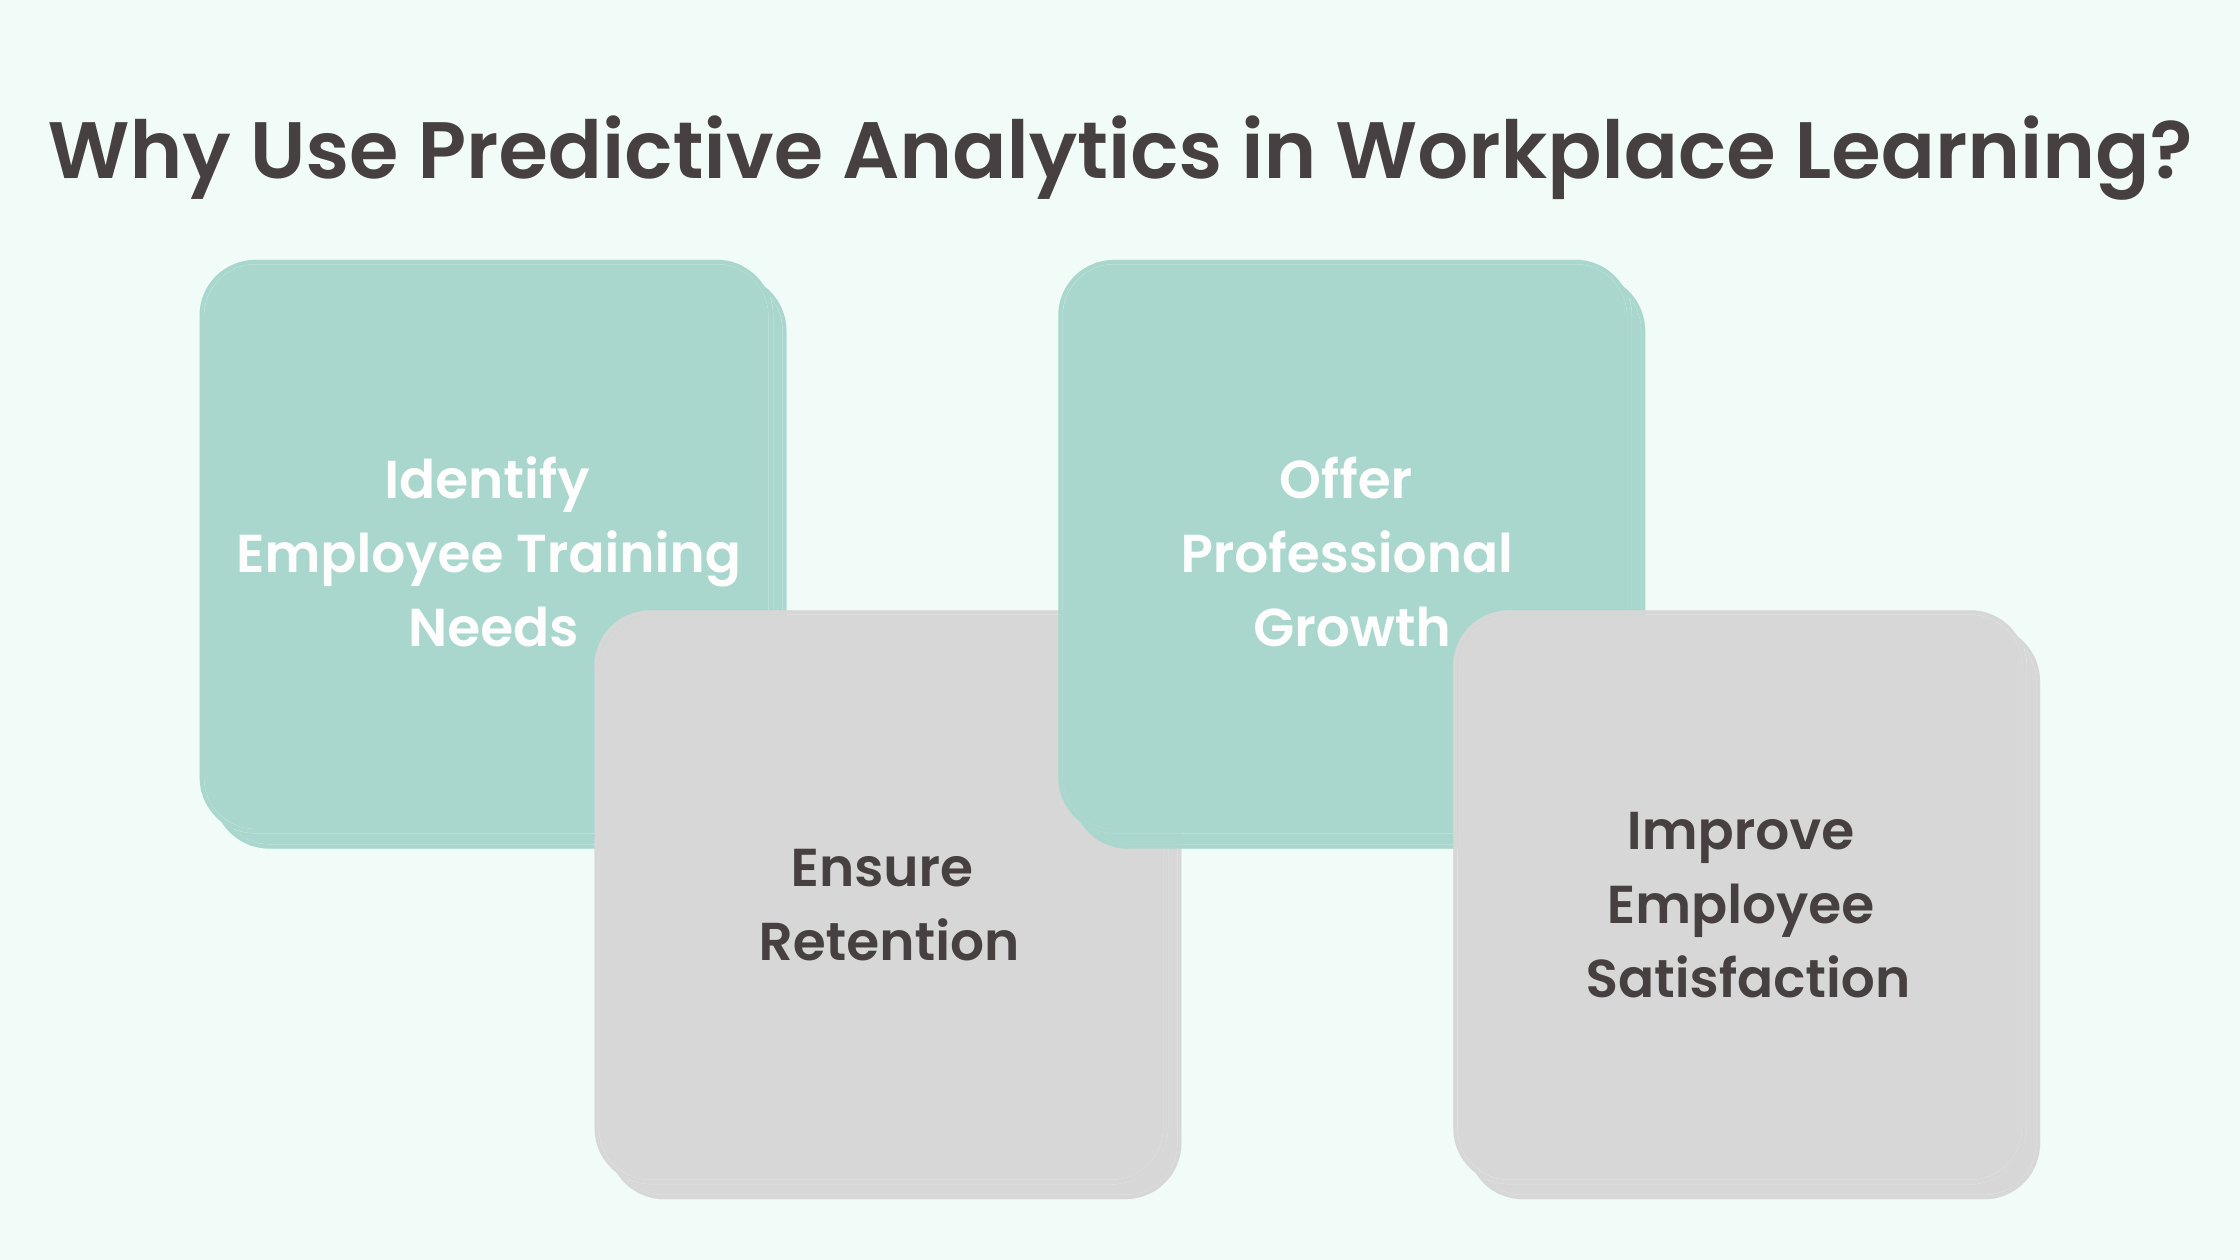 Using Predictive Analytics in Workplace Learning